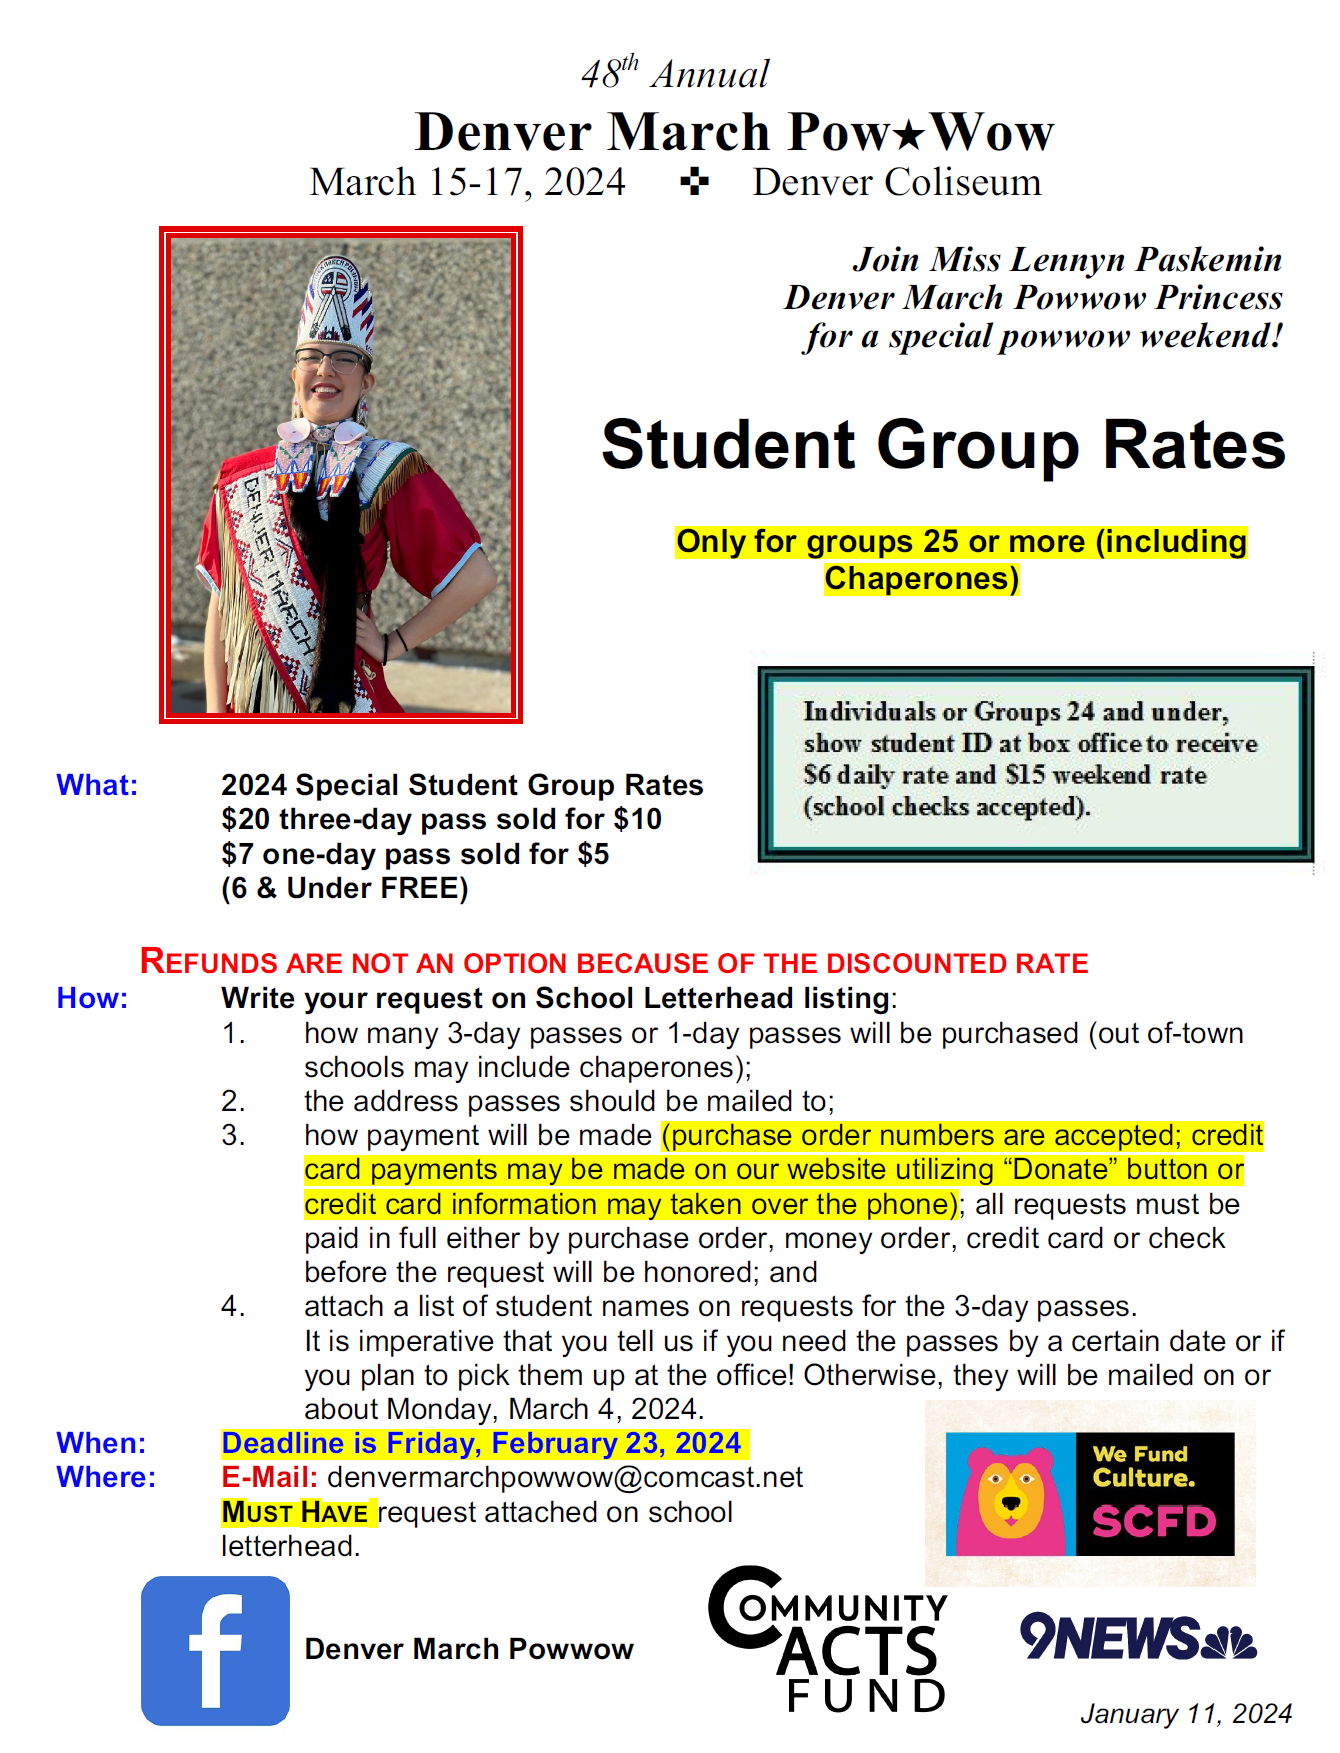 Student Group Rate 2024